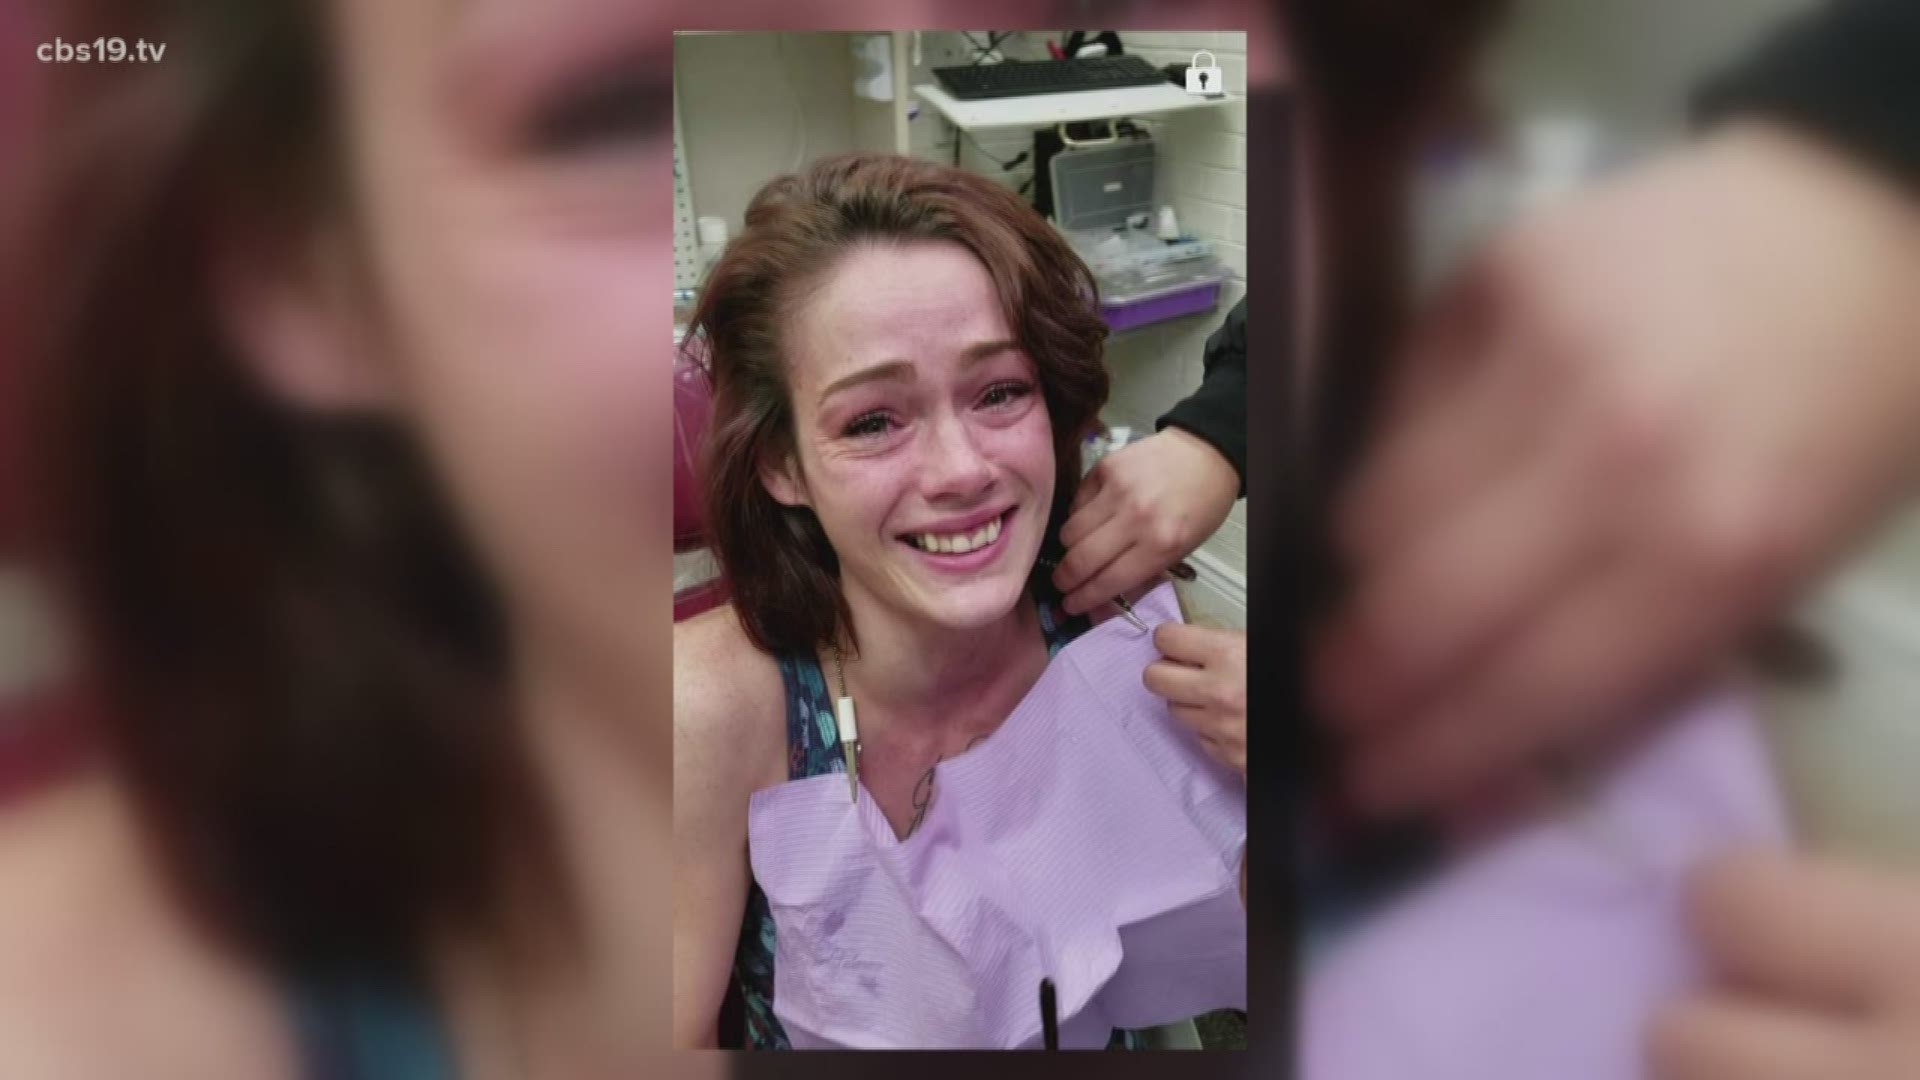 Kyleigha Scott wasn't expecting her broken tooth, fixed for free. Dr. Kenny Wilstead wasn't expecting her reaction to go viral. 